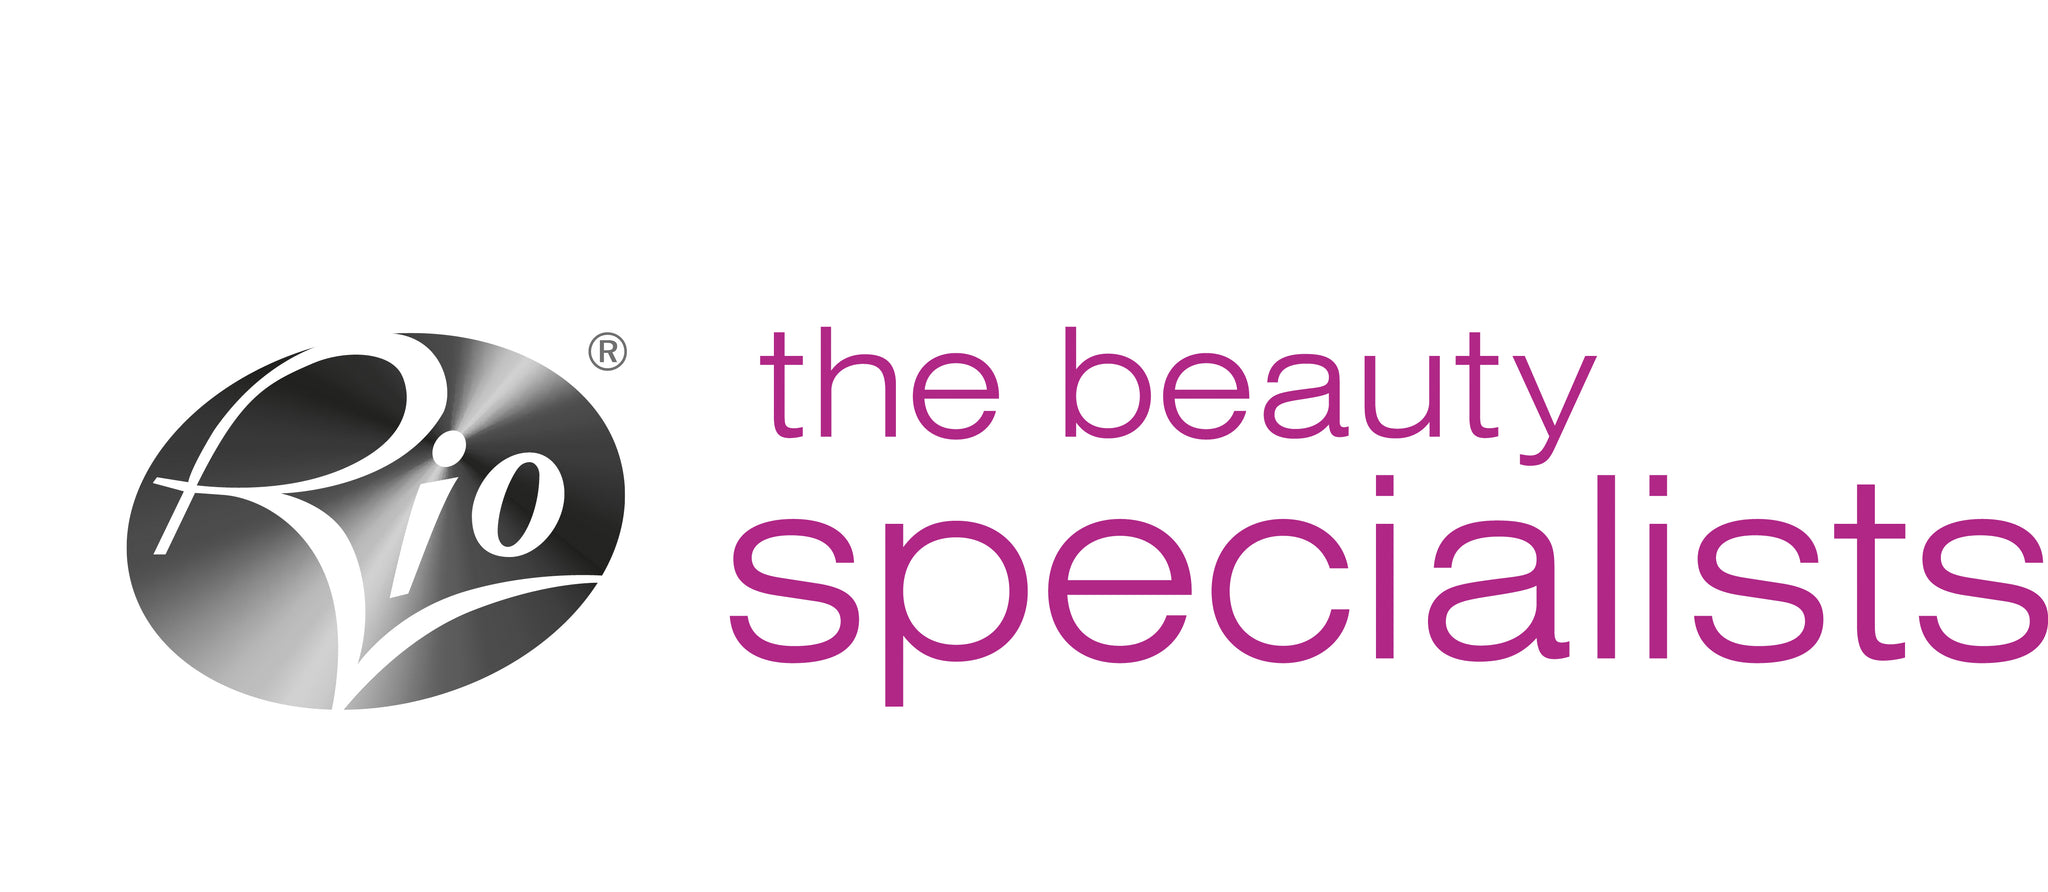 Conductive Gel for face, feet and sensitive skin + TENS machine & EMS - Rio  the Beauty Specialists